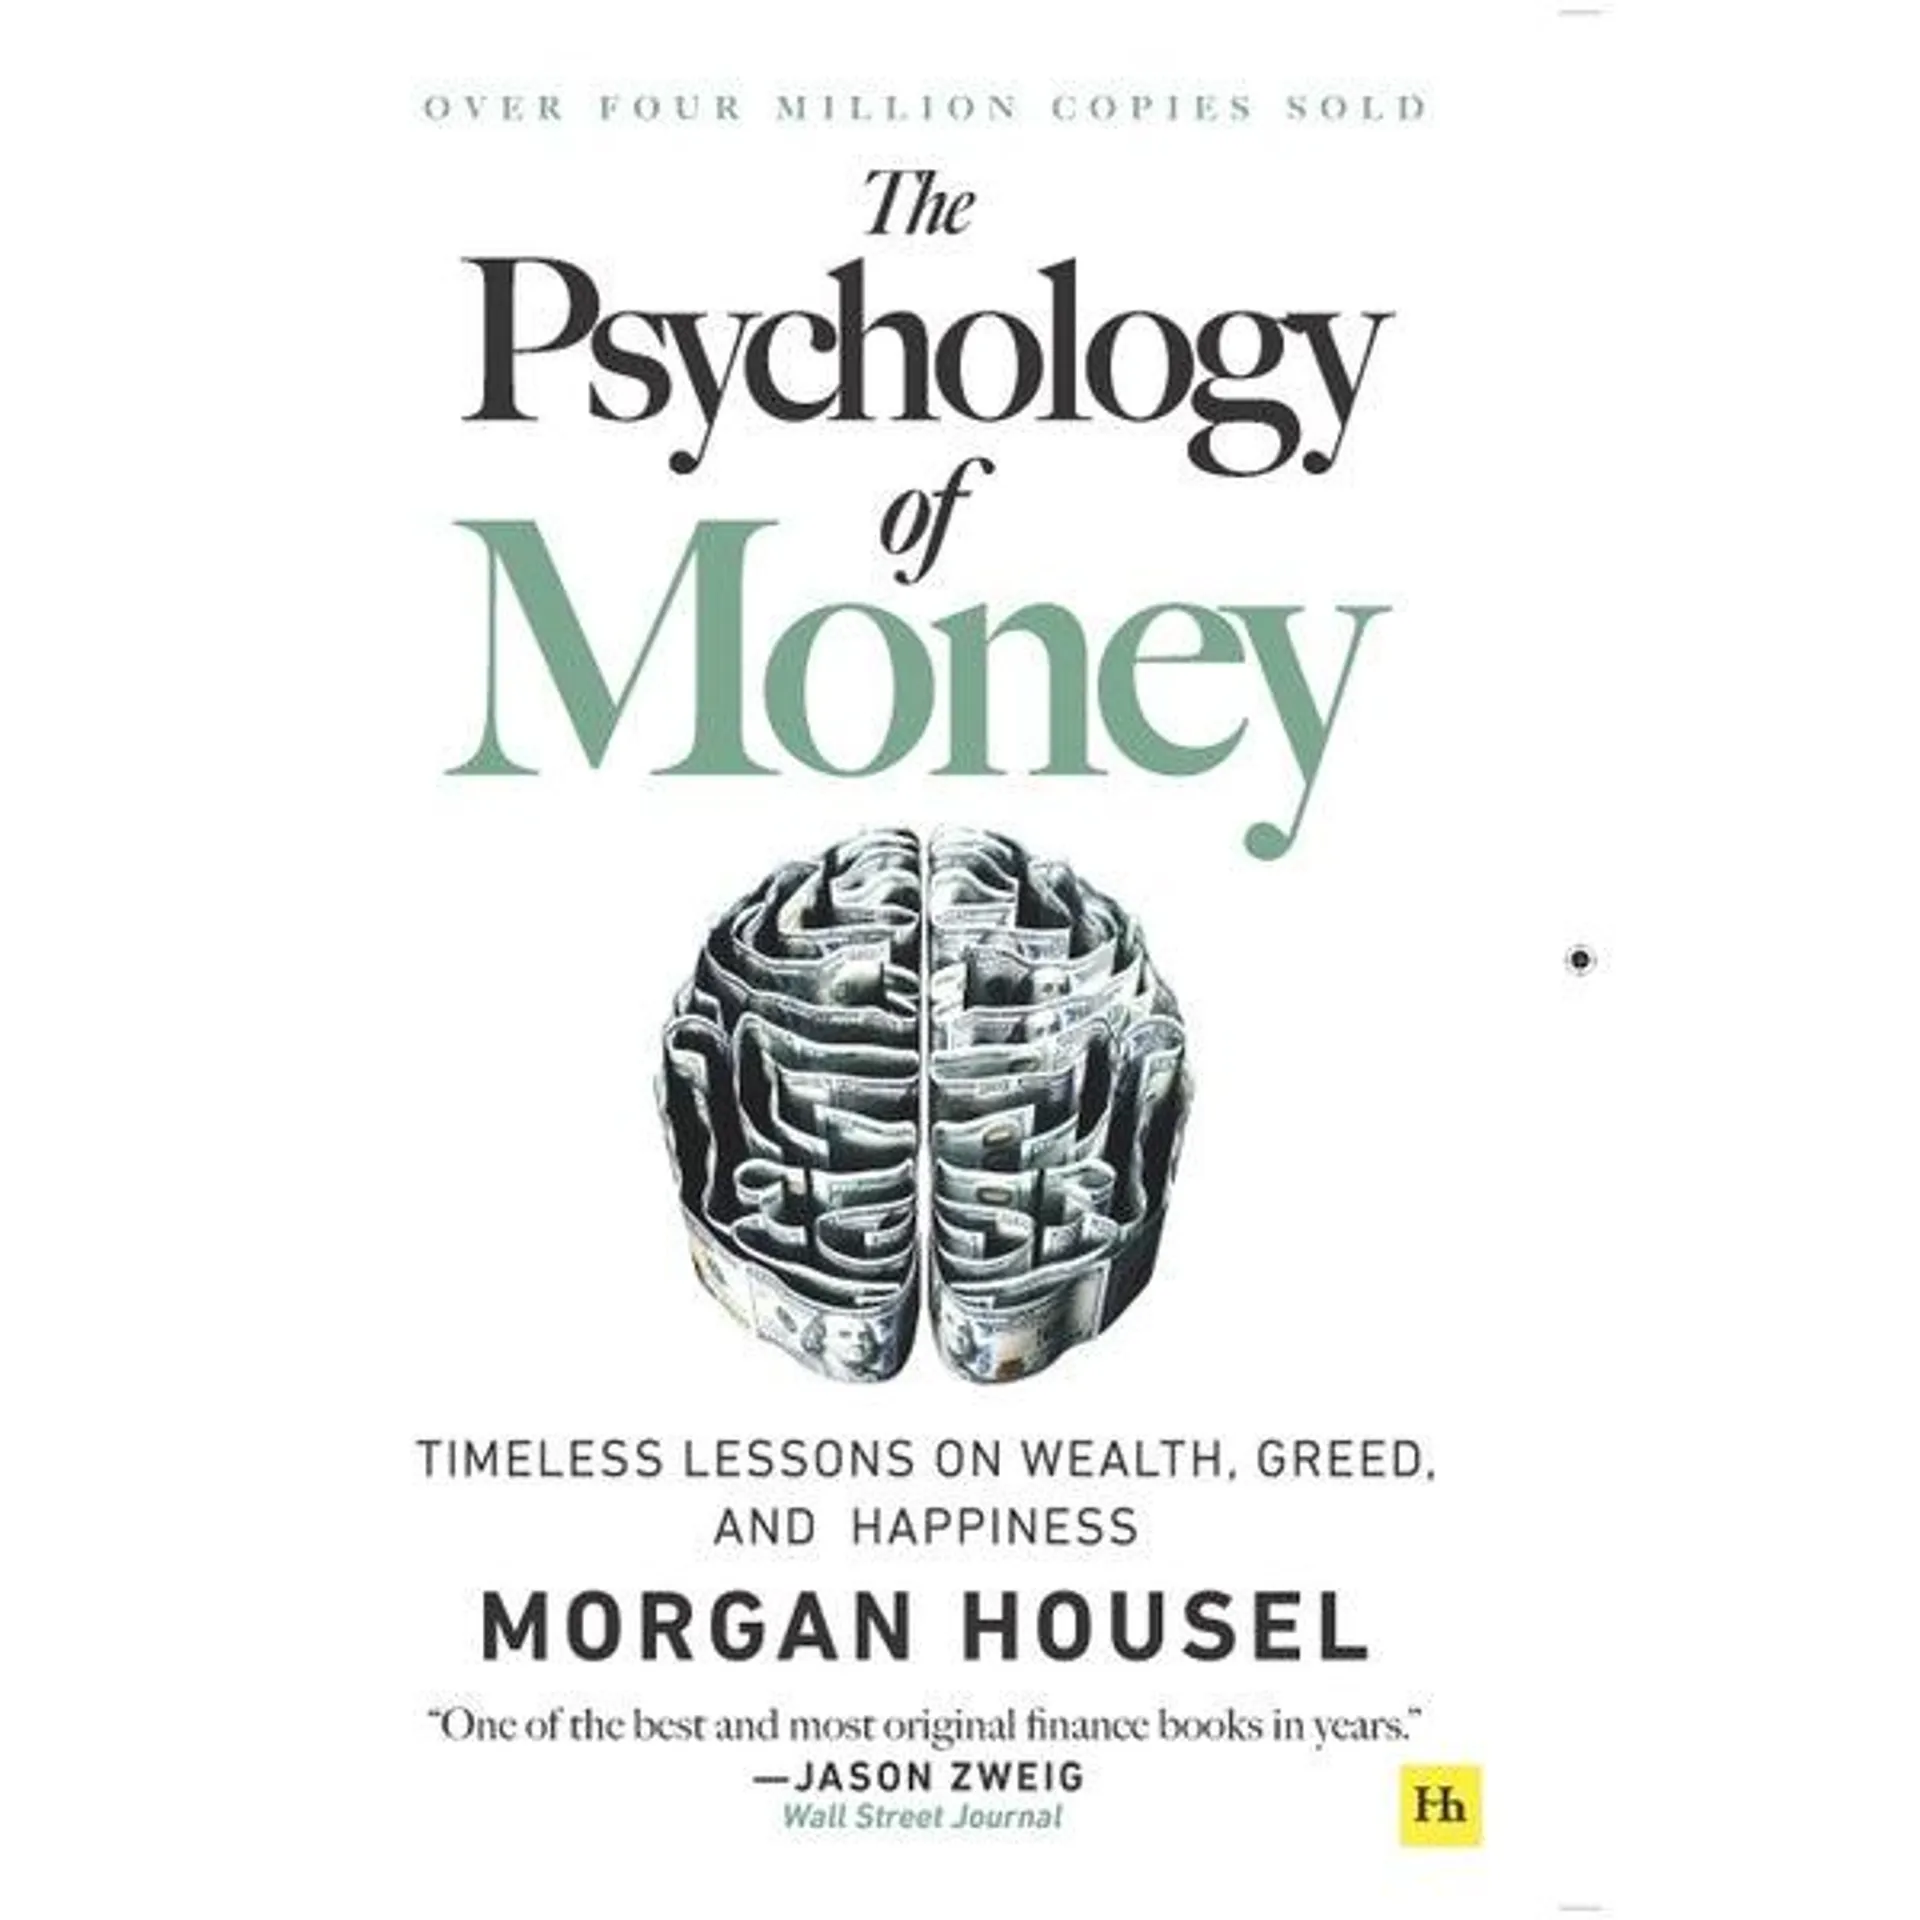 The Psychology of Money Trade Paperback